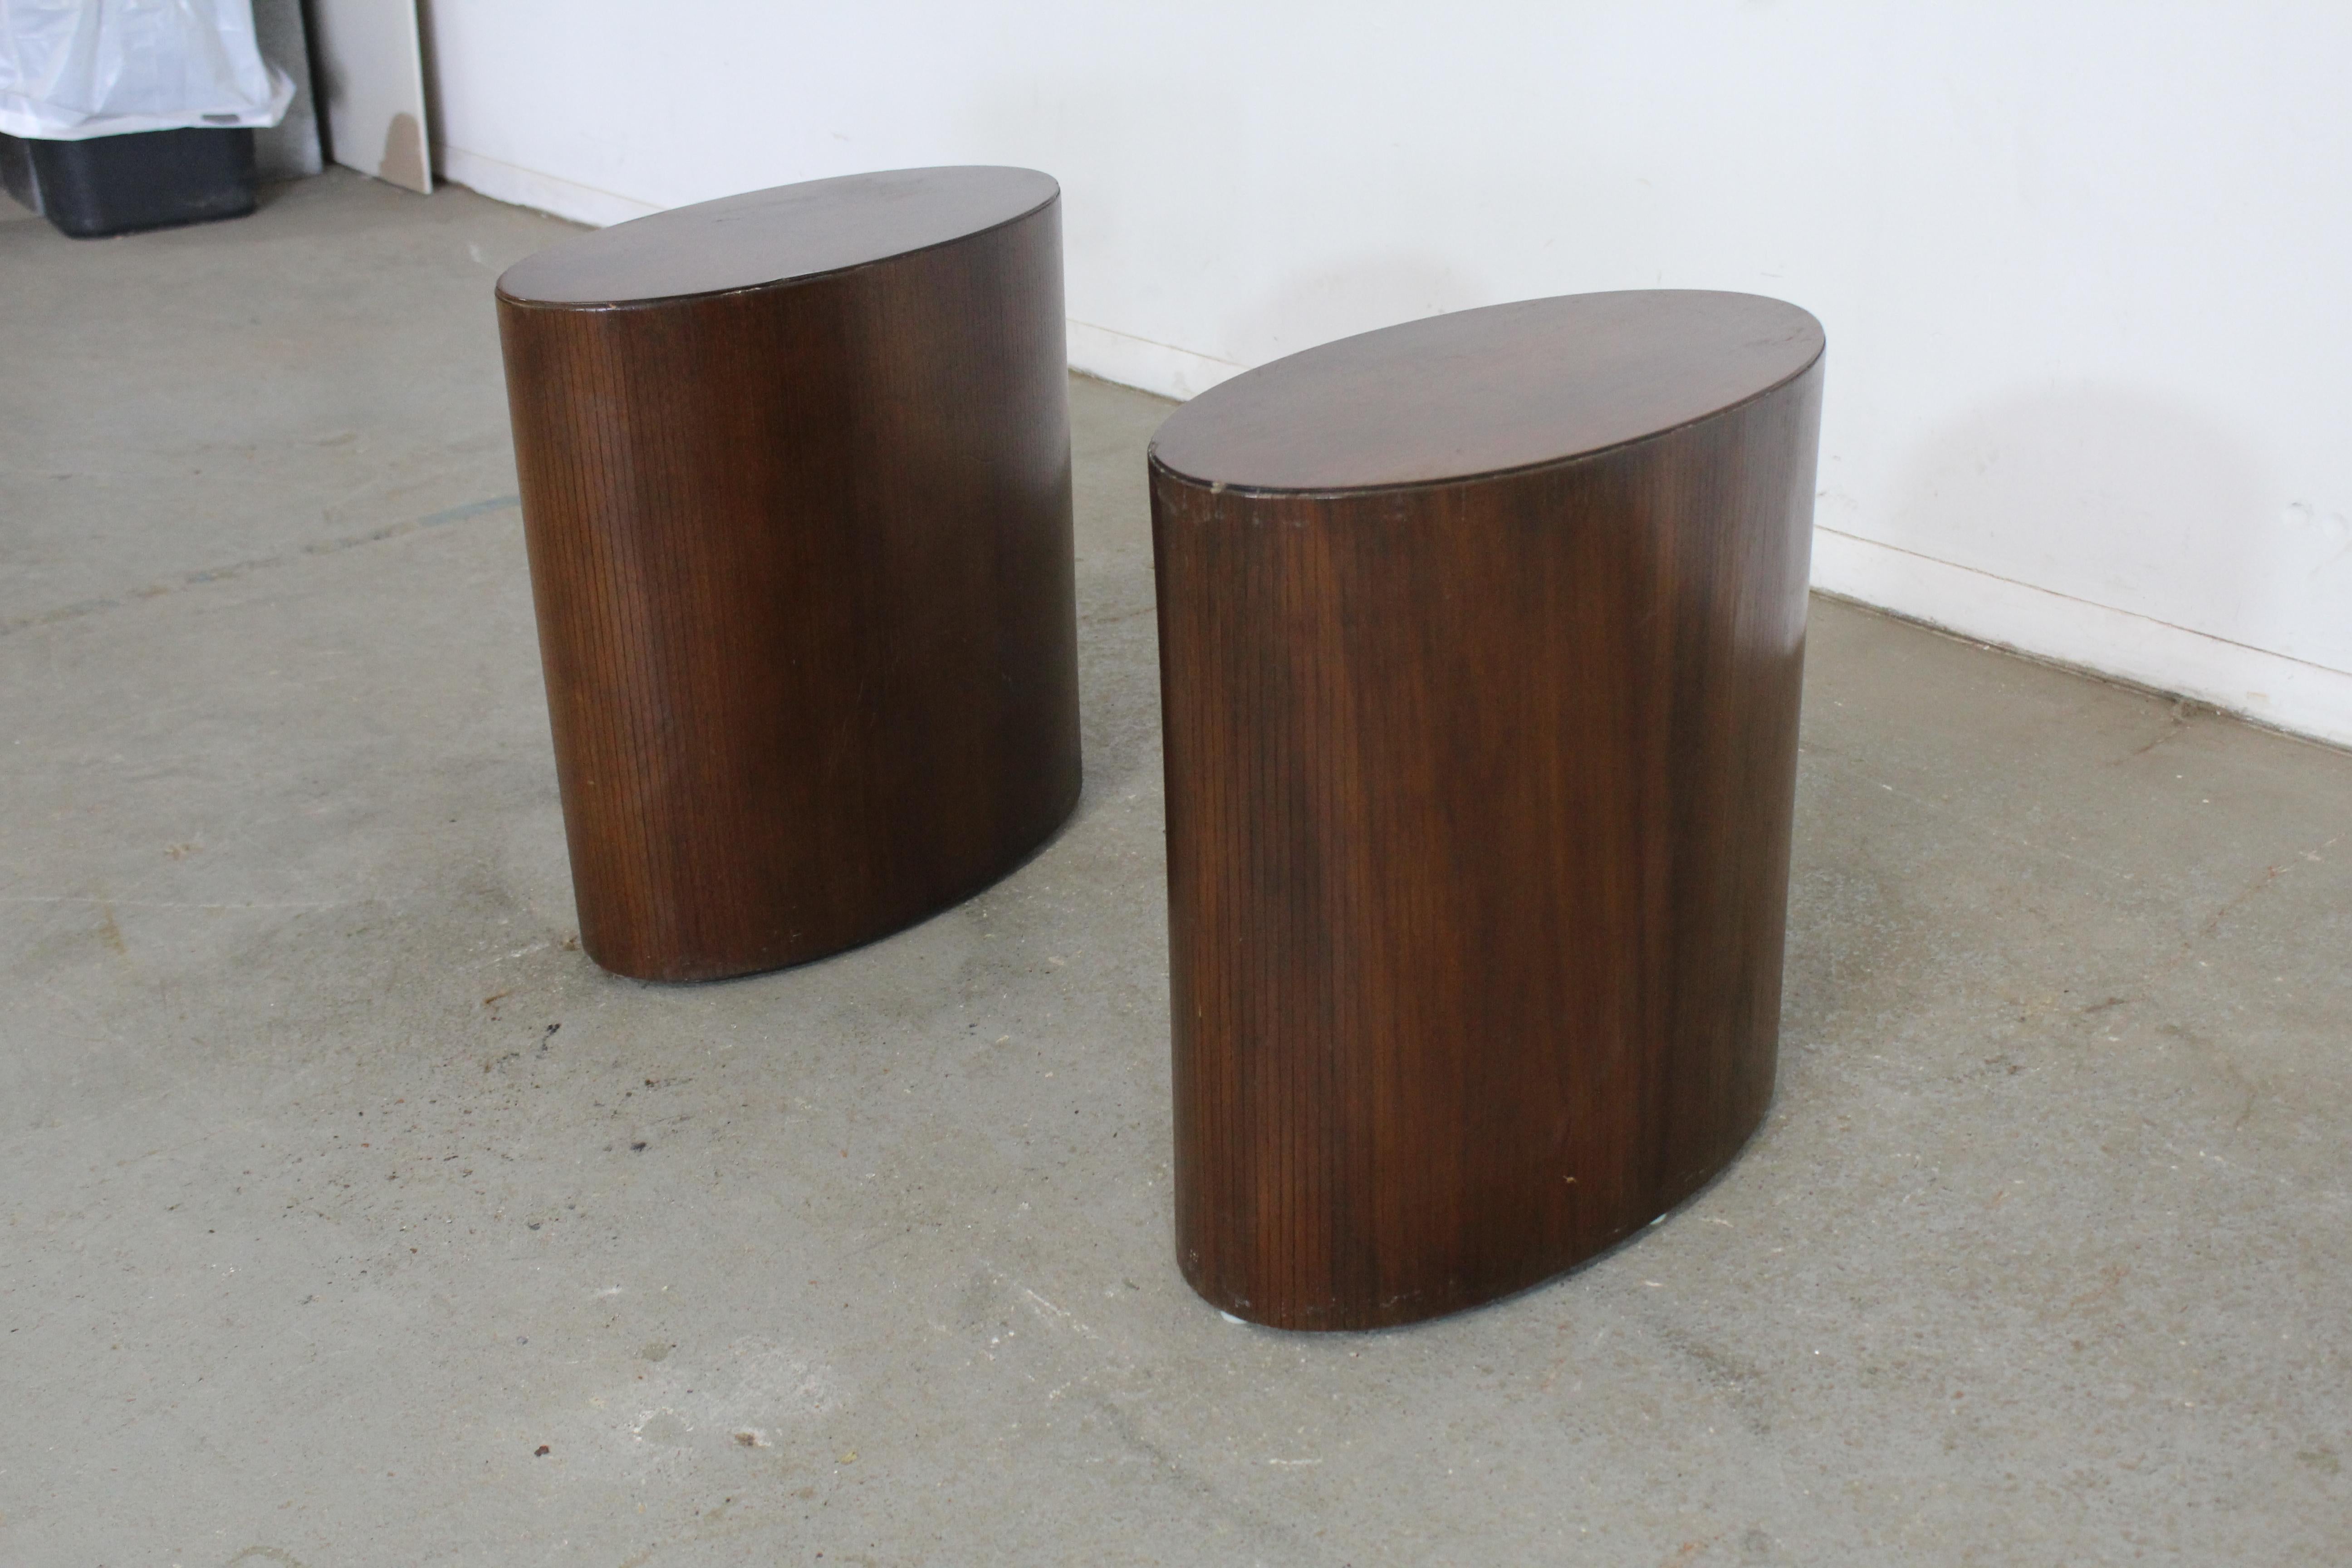 20th Century Pair of Mid-Century Modern Oval Walnut Pedestal/Stands/End Table by Lane For Sale